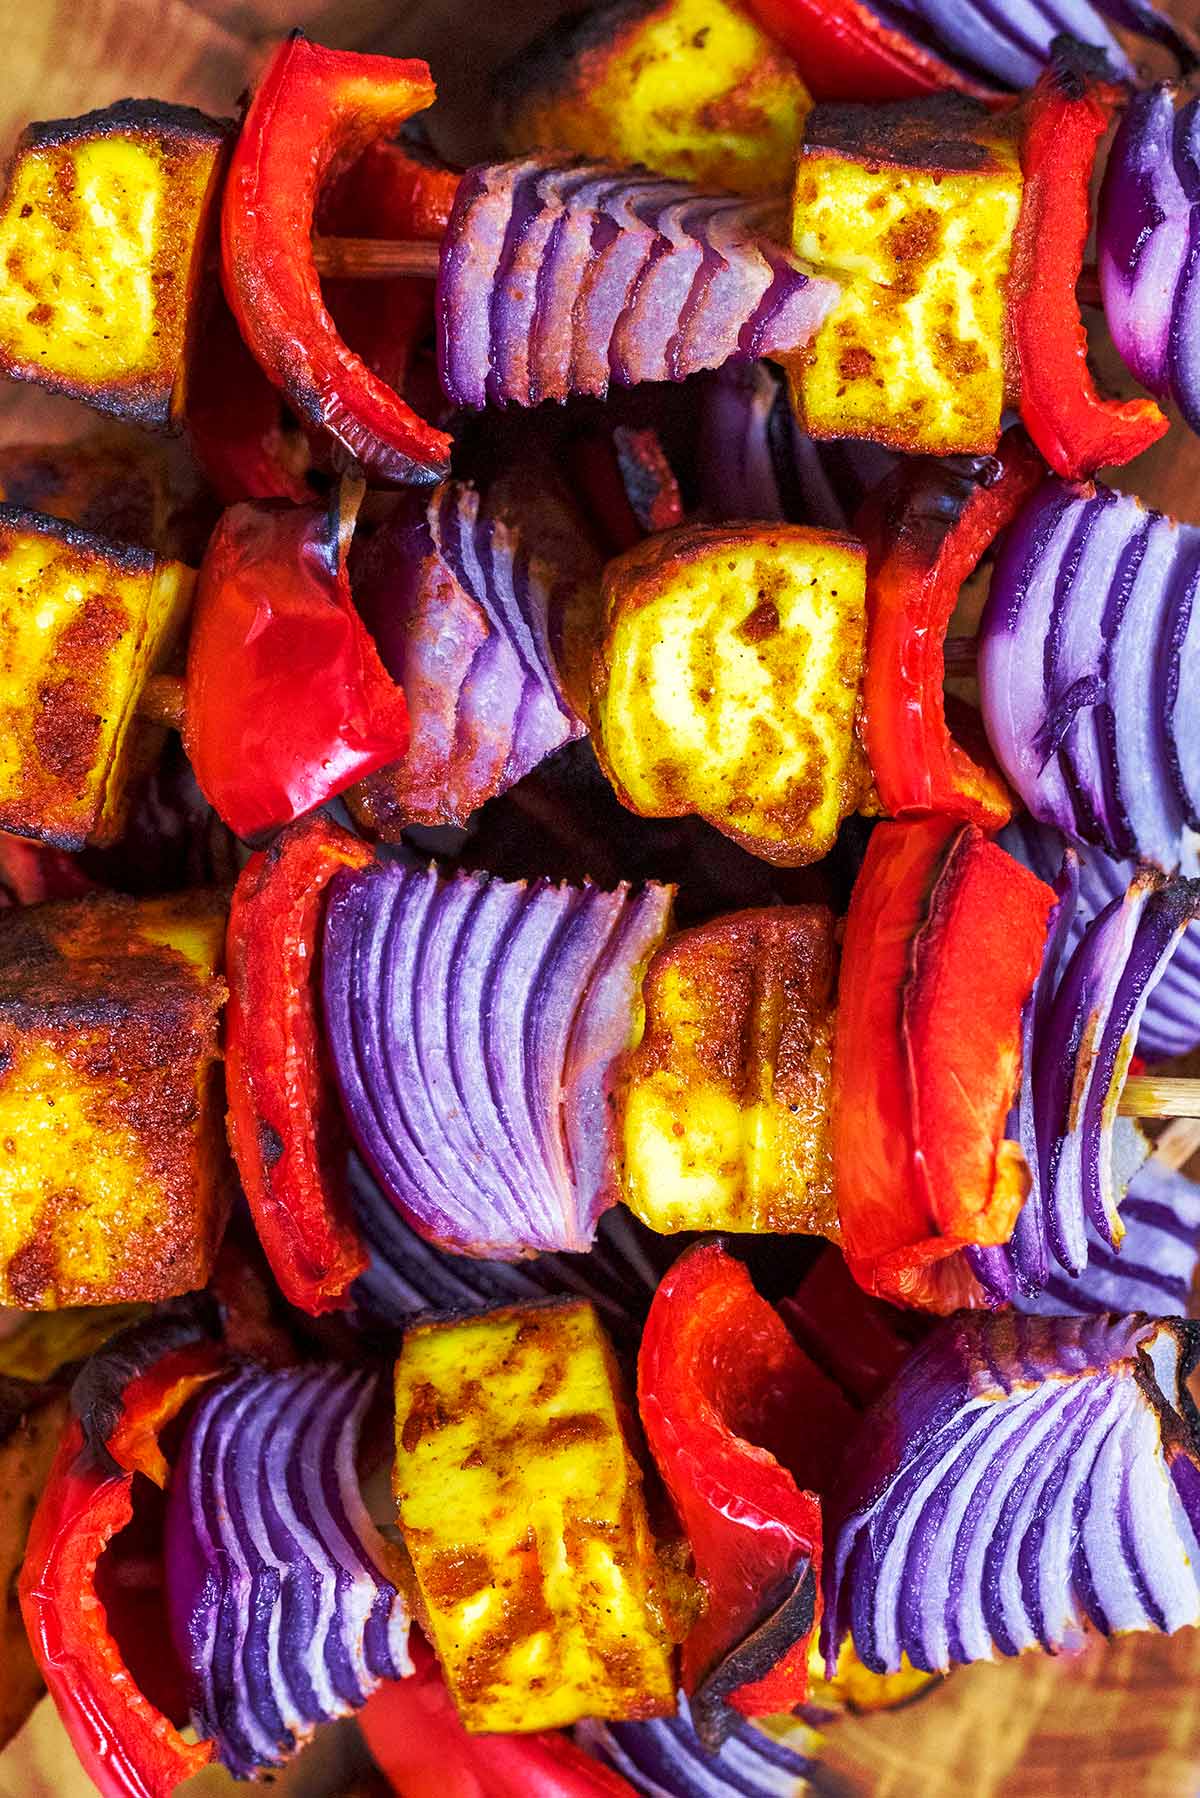 Cubes of paneer, slices of red pepper and chunks of red onion on skewers.